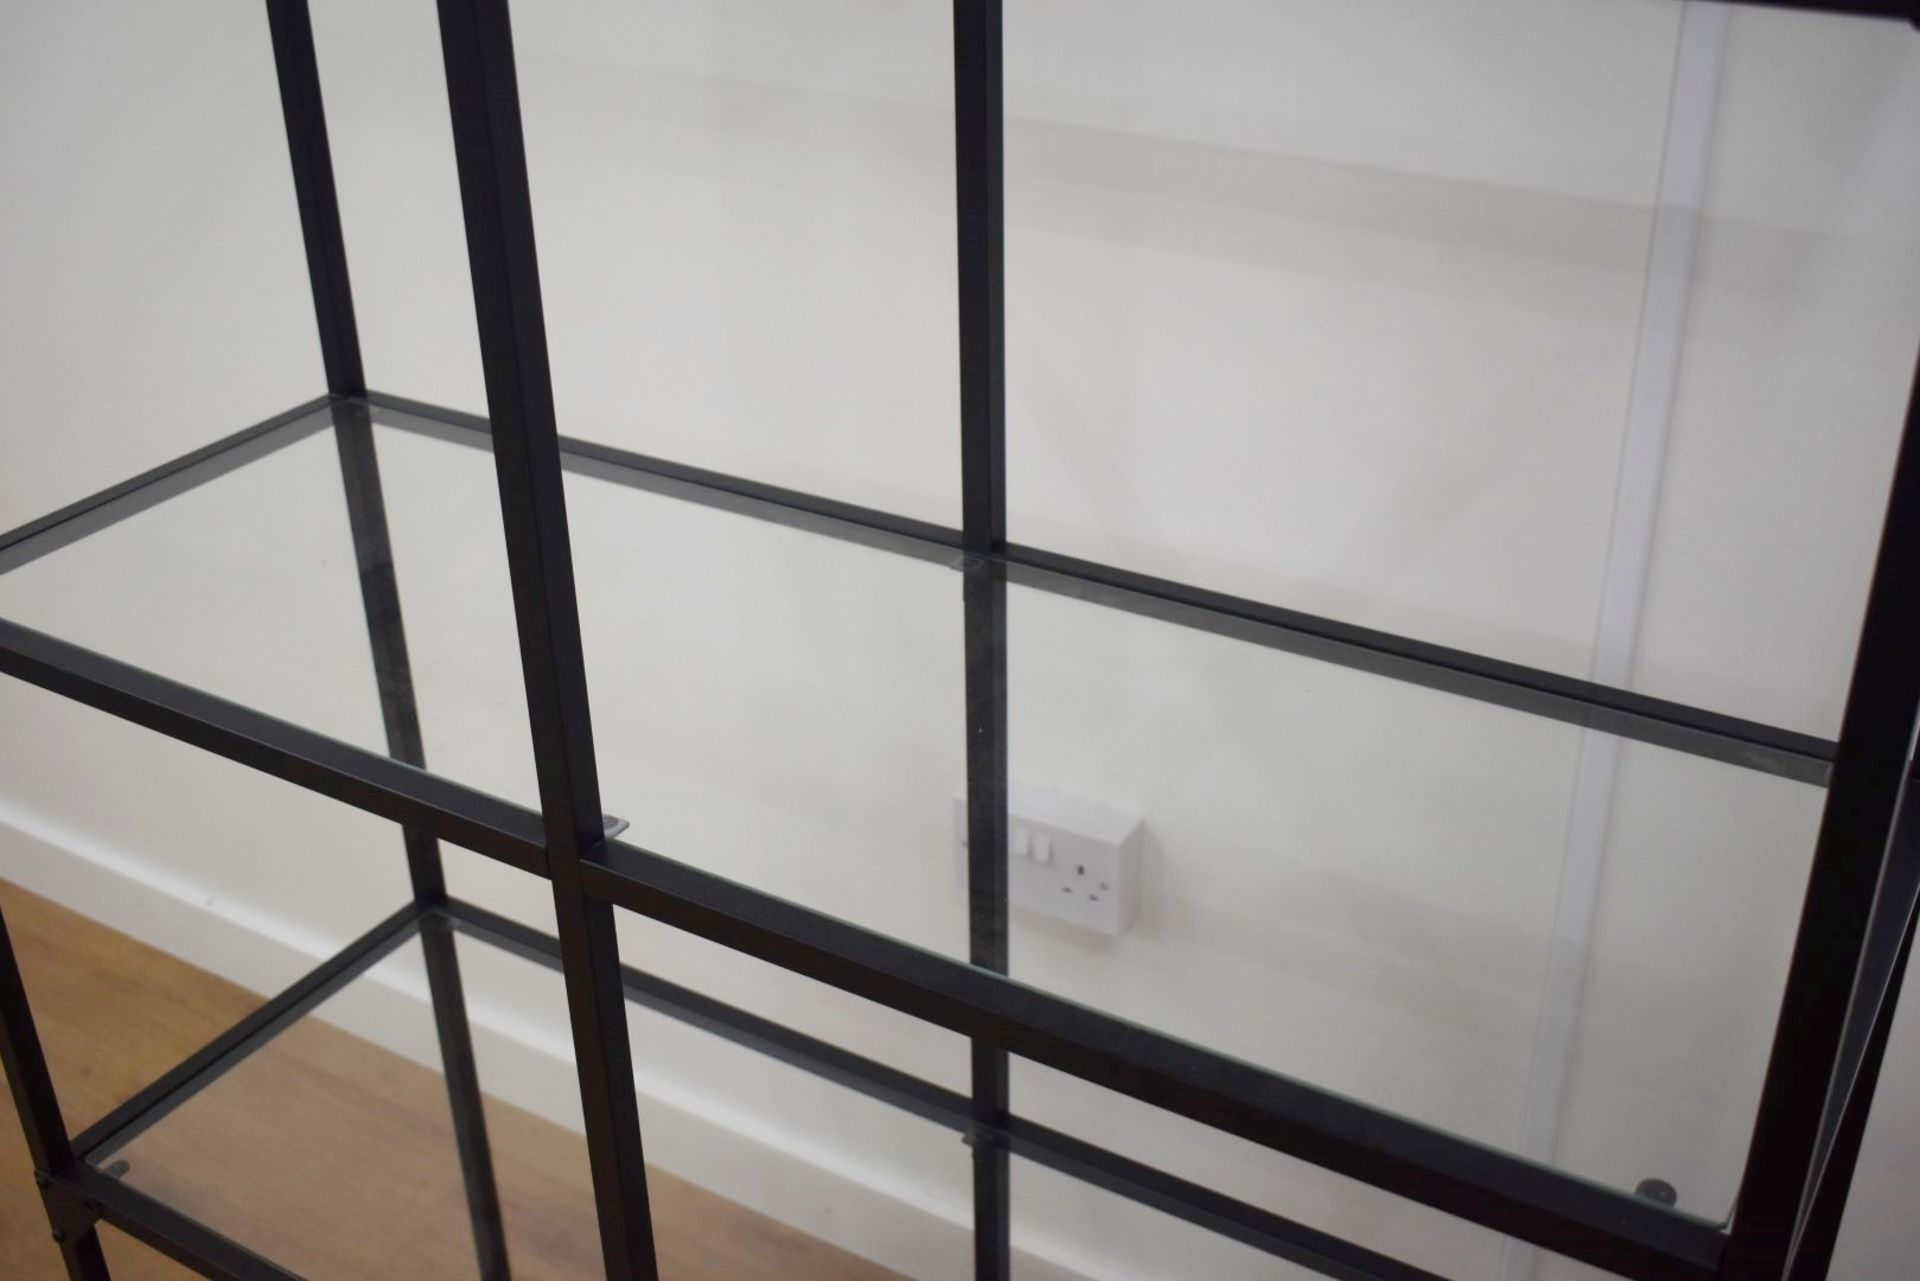 1 x Upright Modern Display Shelving Unit With Metal Frame and Glass Shelves - Image 3 of 5